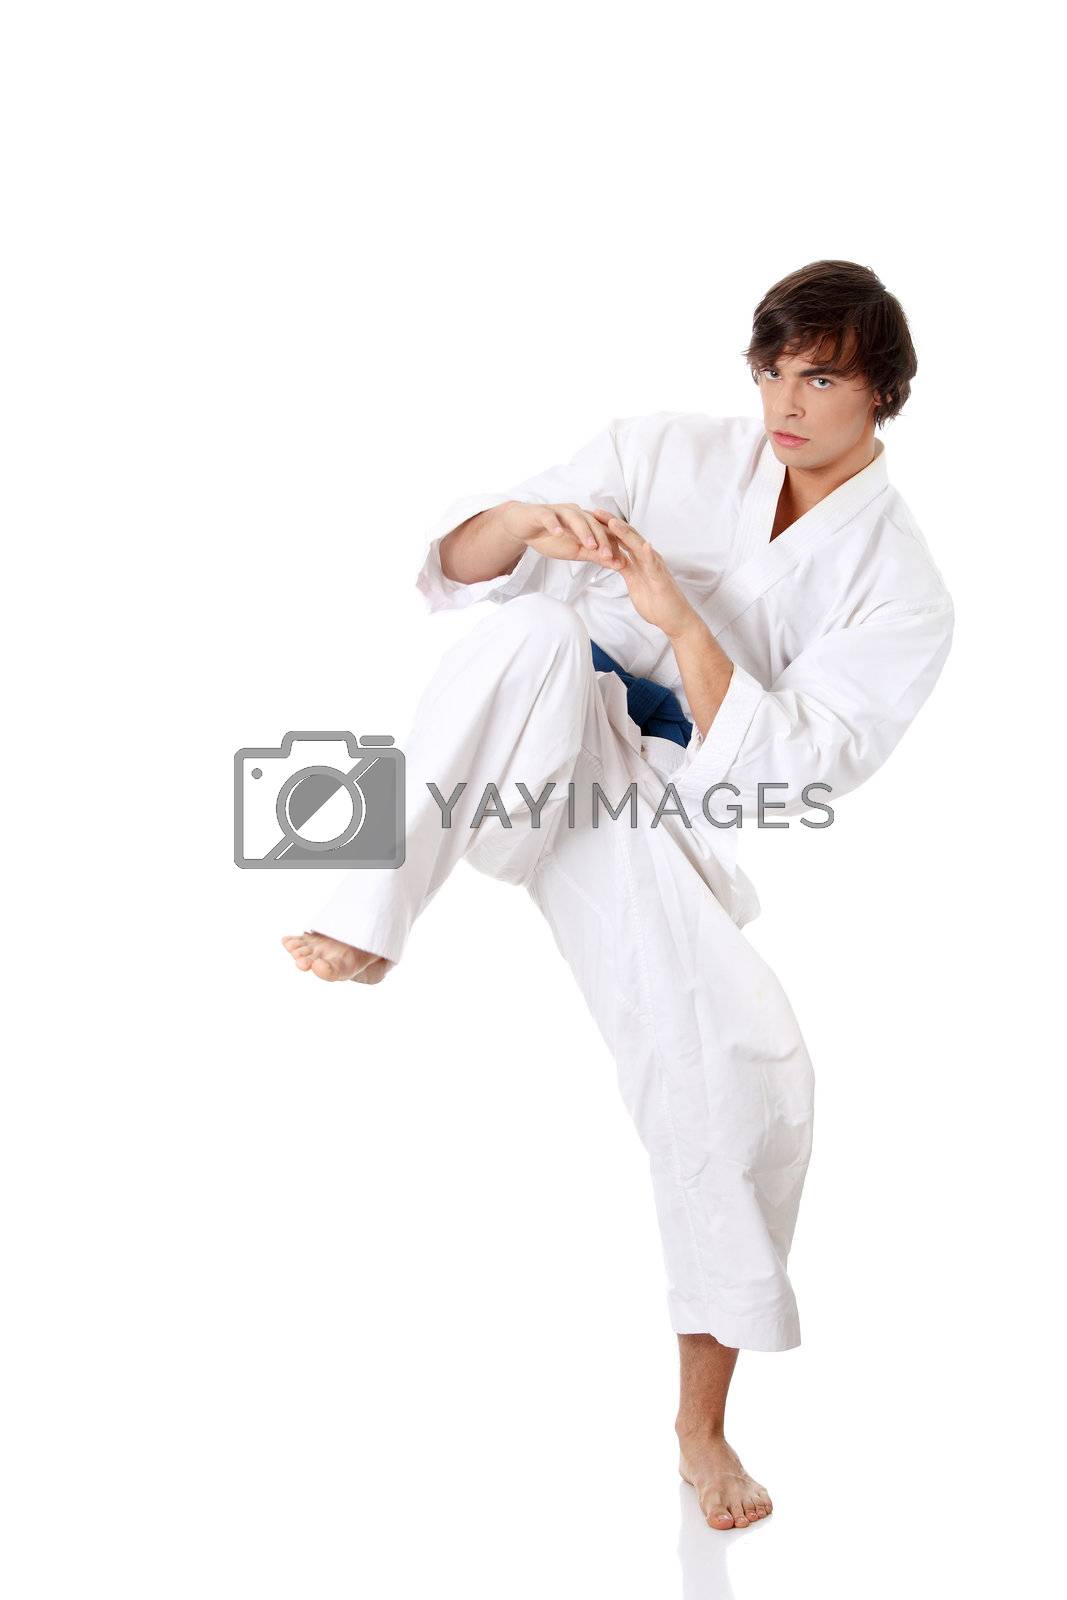 Royalty free image of Karate by BDS